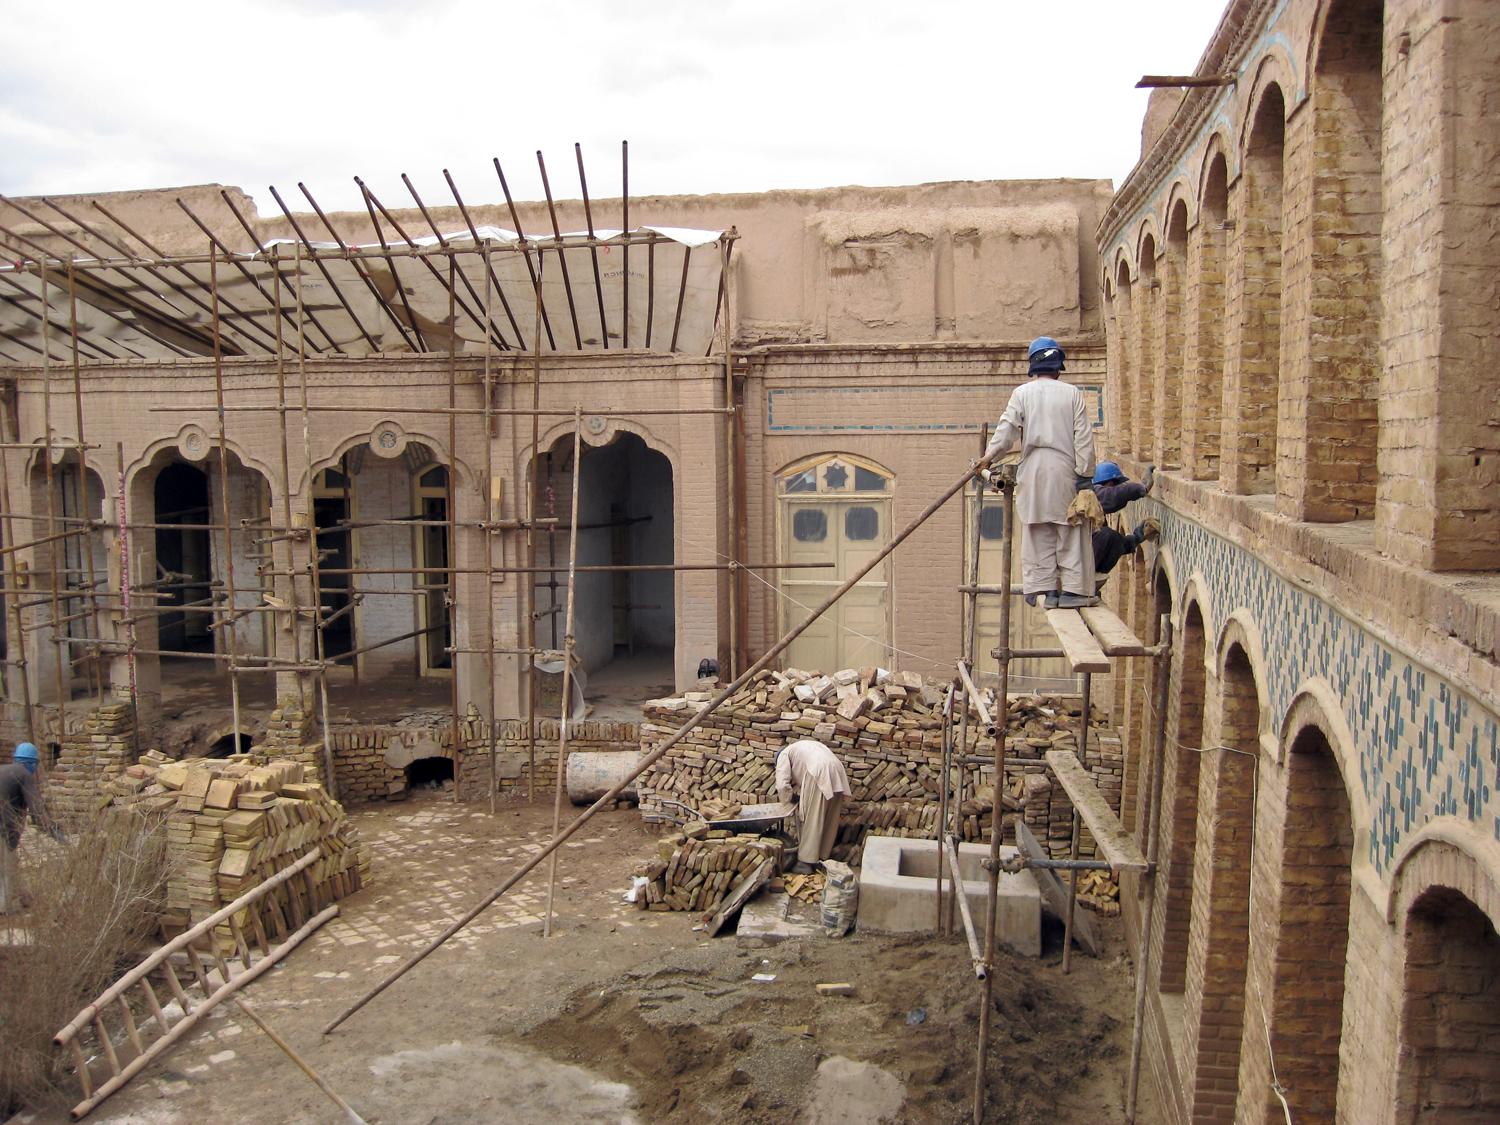 Courtyard during conservation